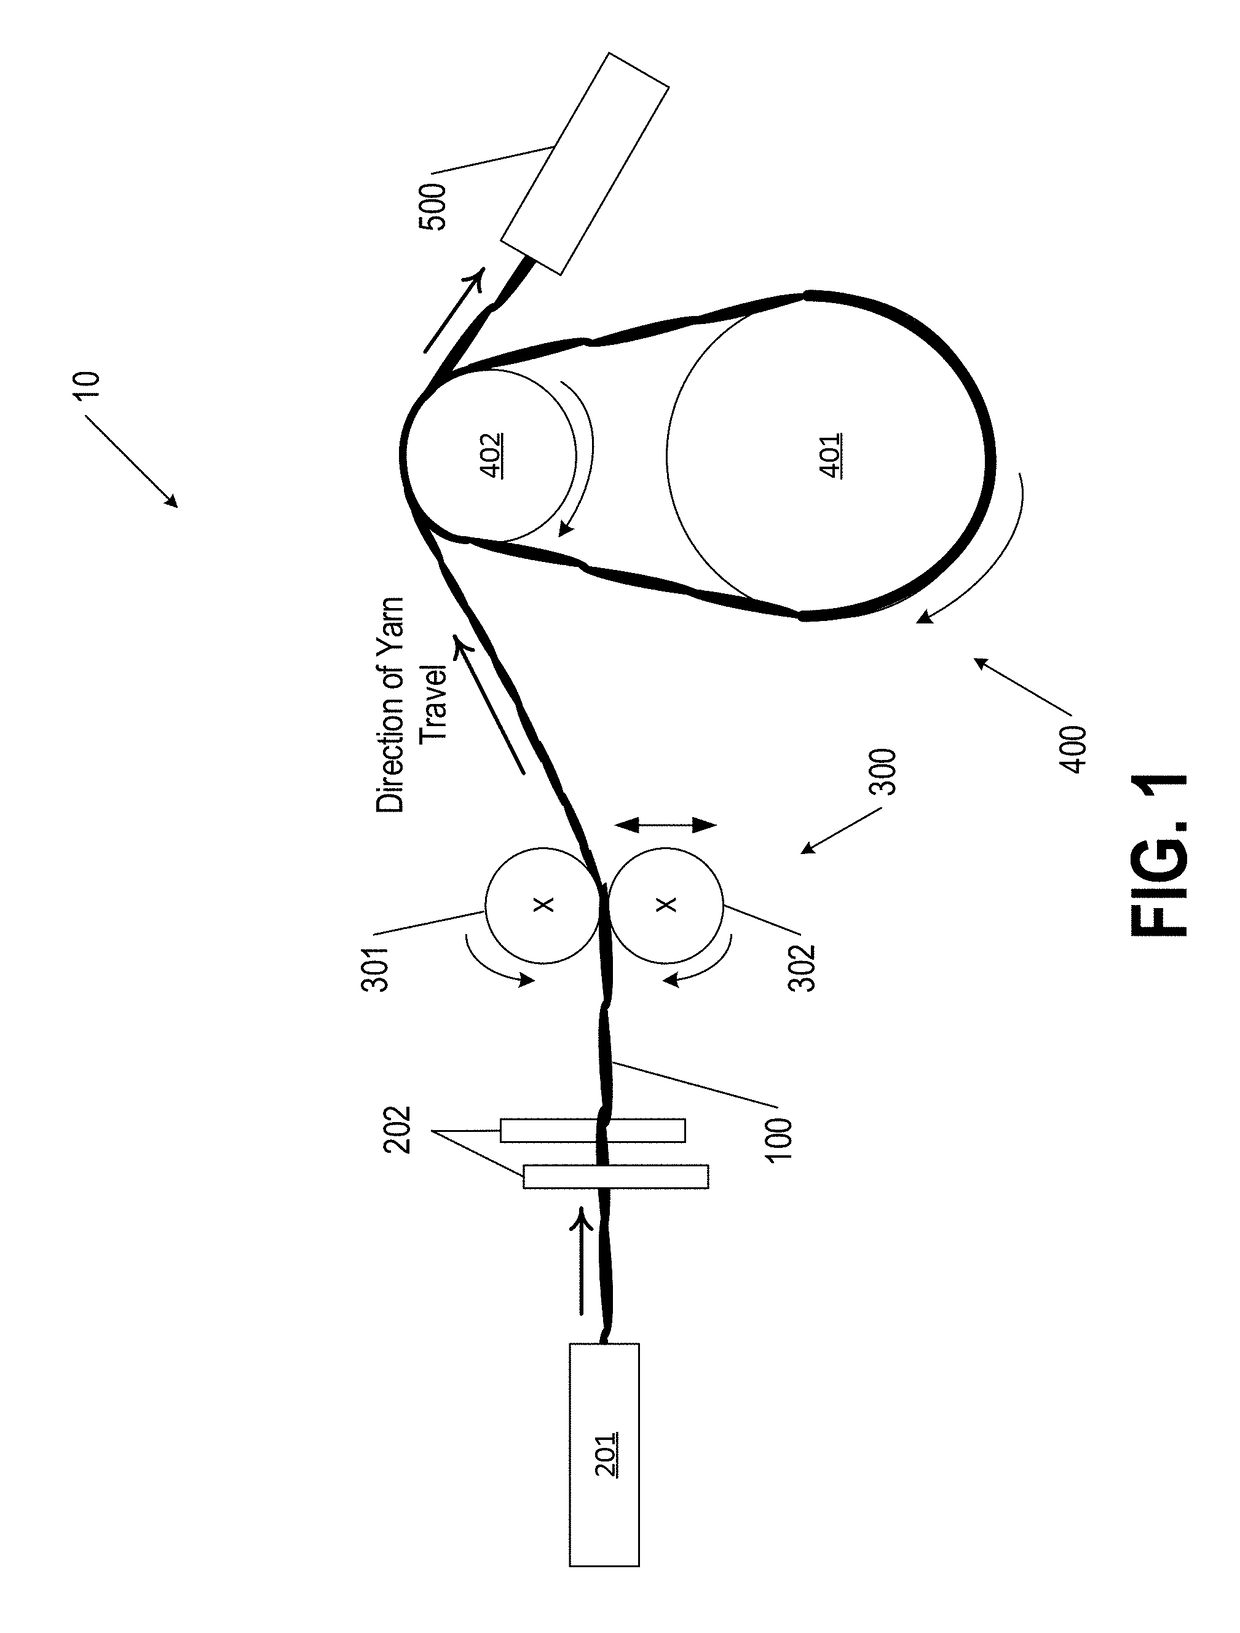 Device and method for detecting yarn characteristics